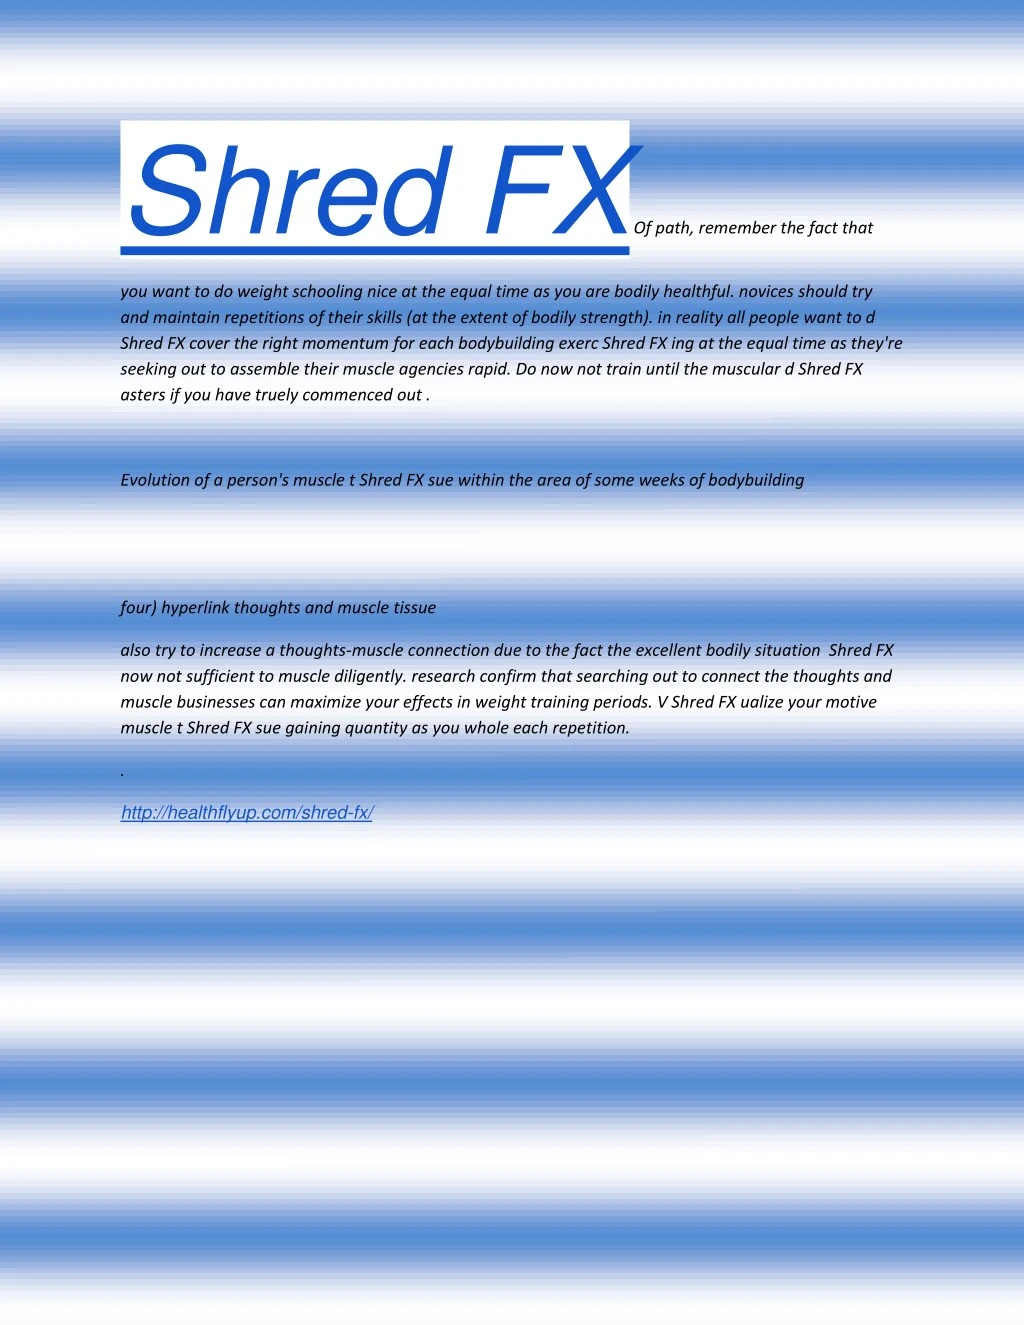 shred fx of path remember the fact that